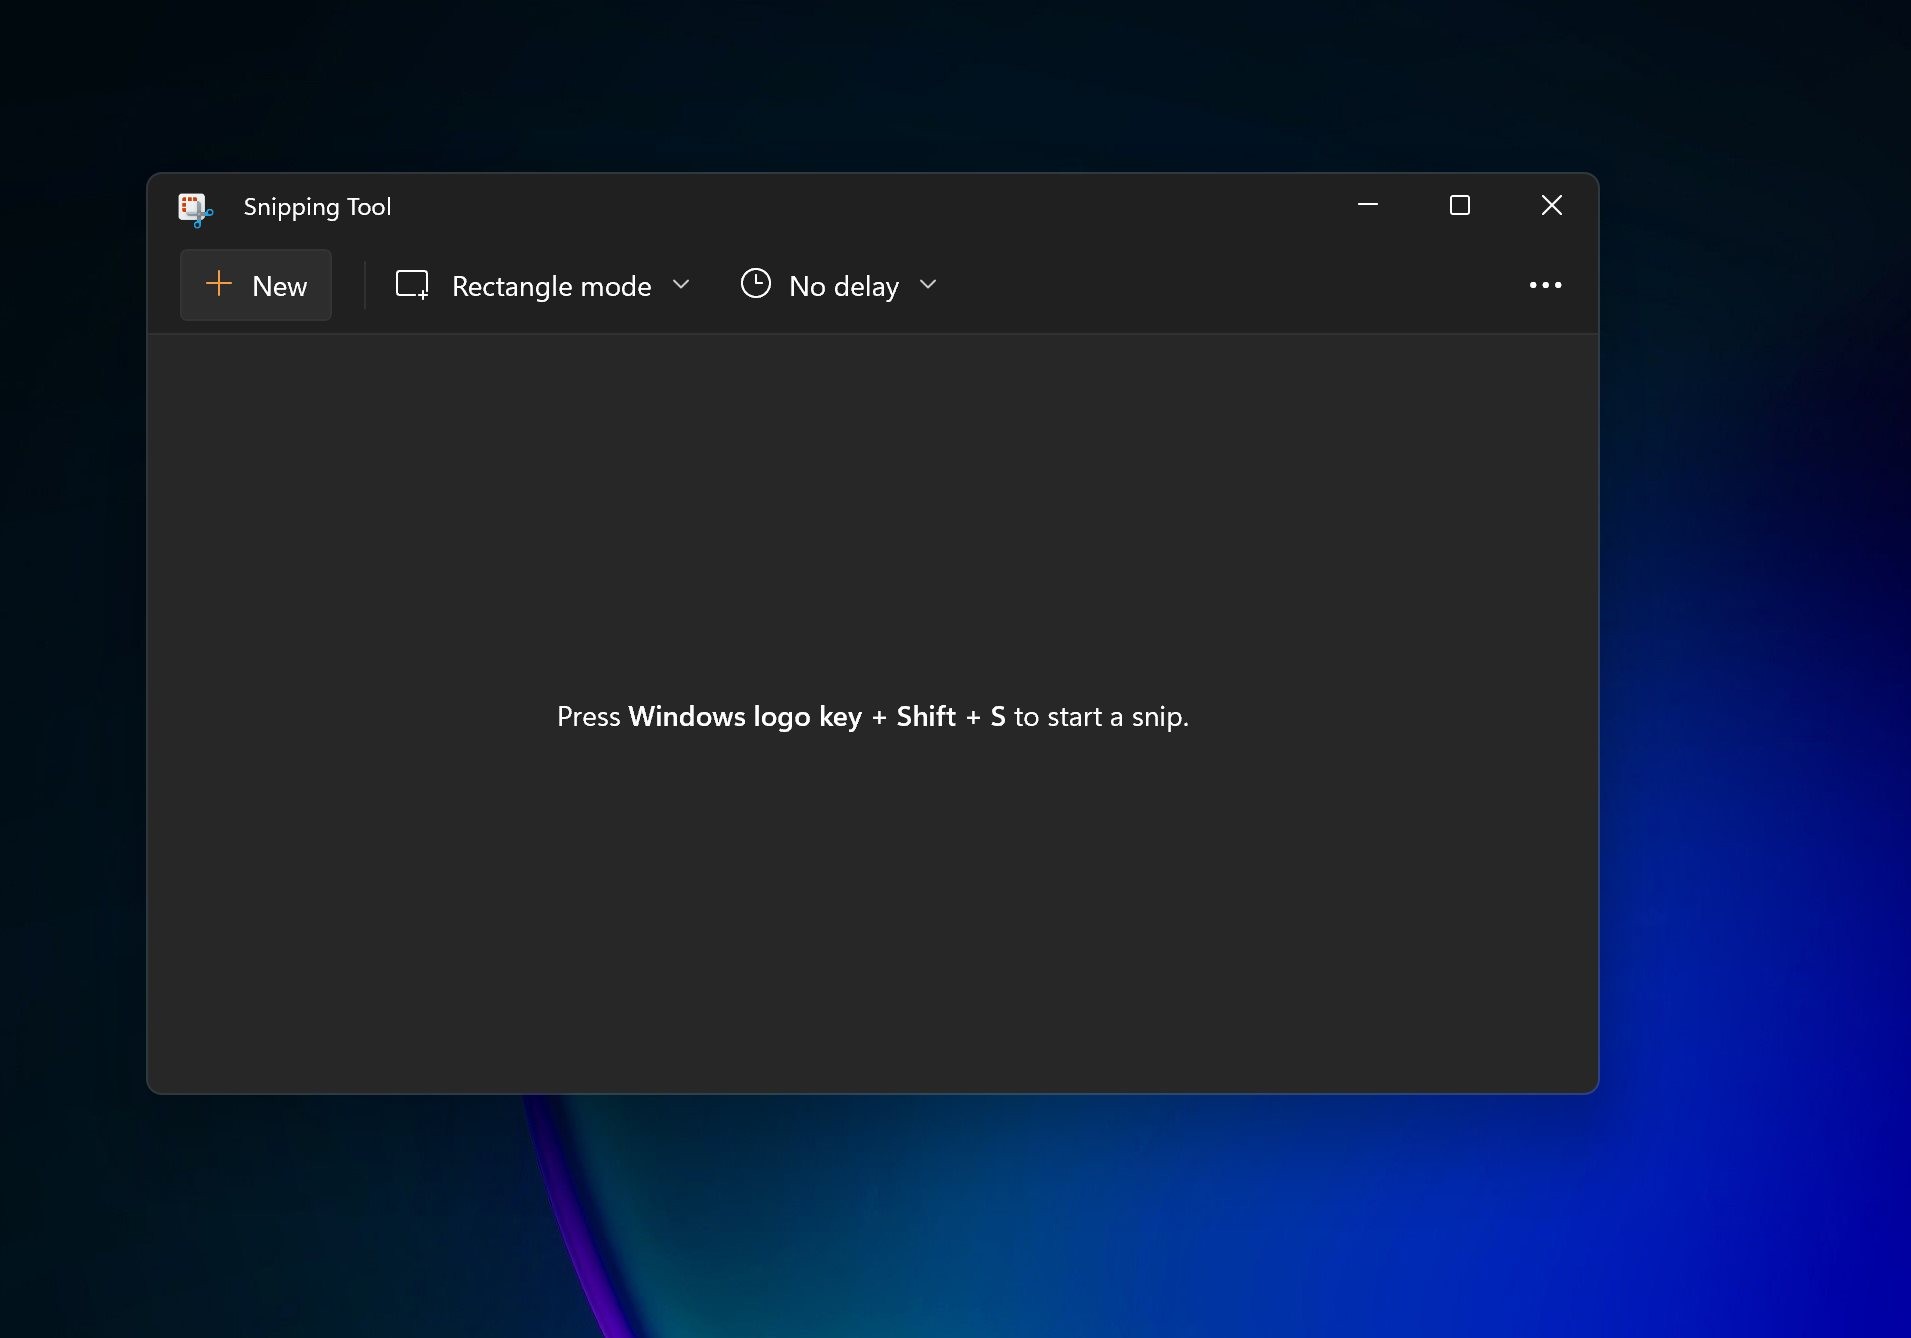 Windows 11 users claim the snipping tool is broken